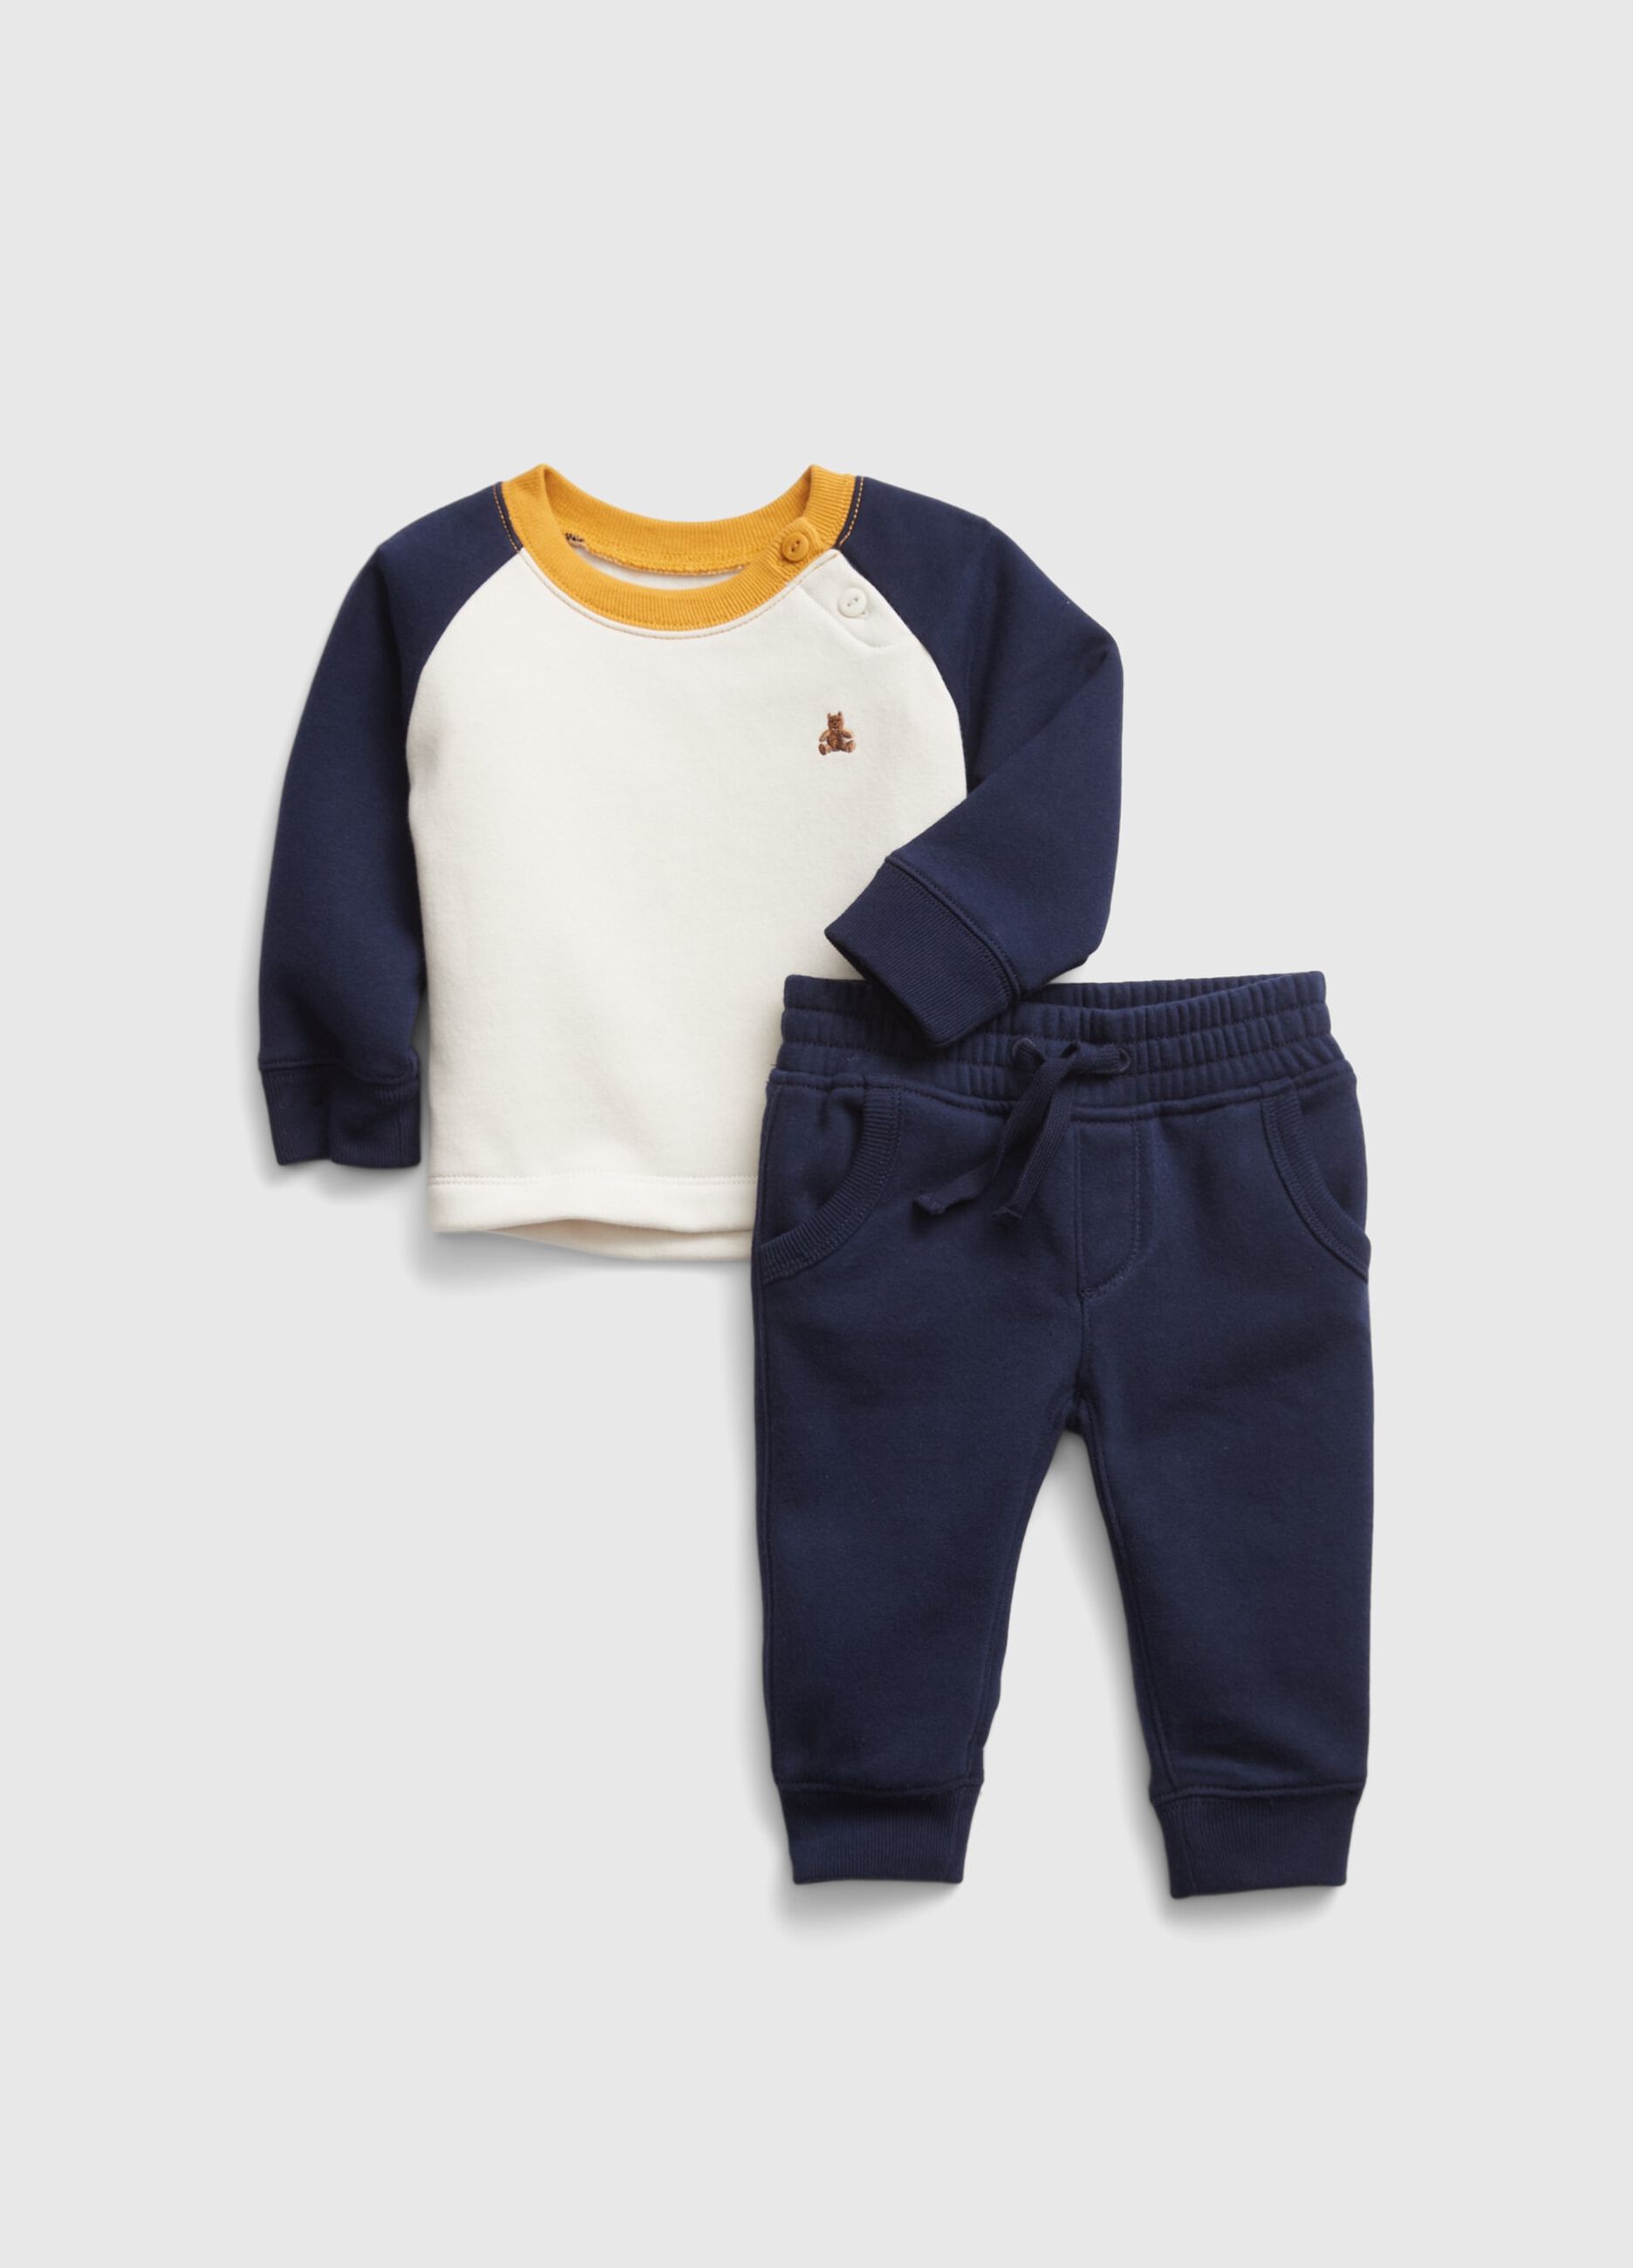 Plush jogging set with teddy bear embroidery